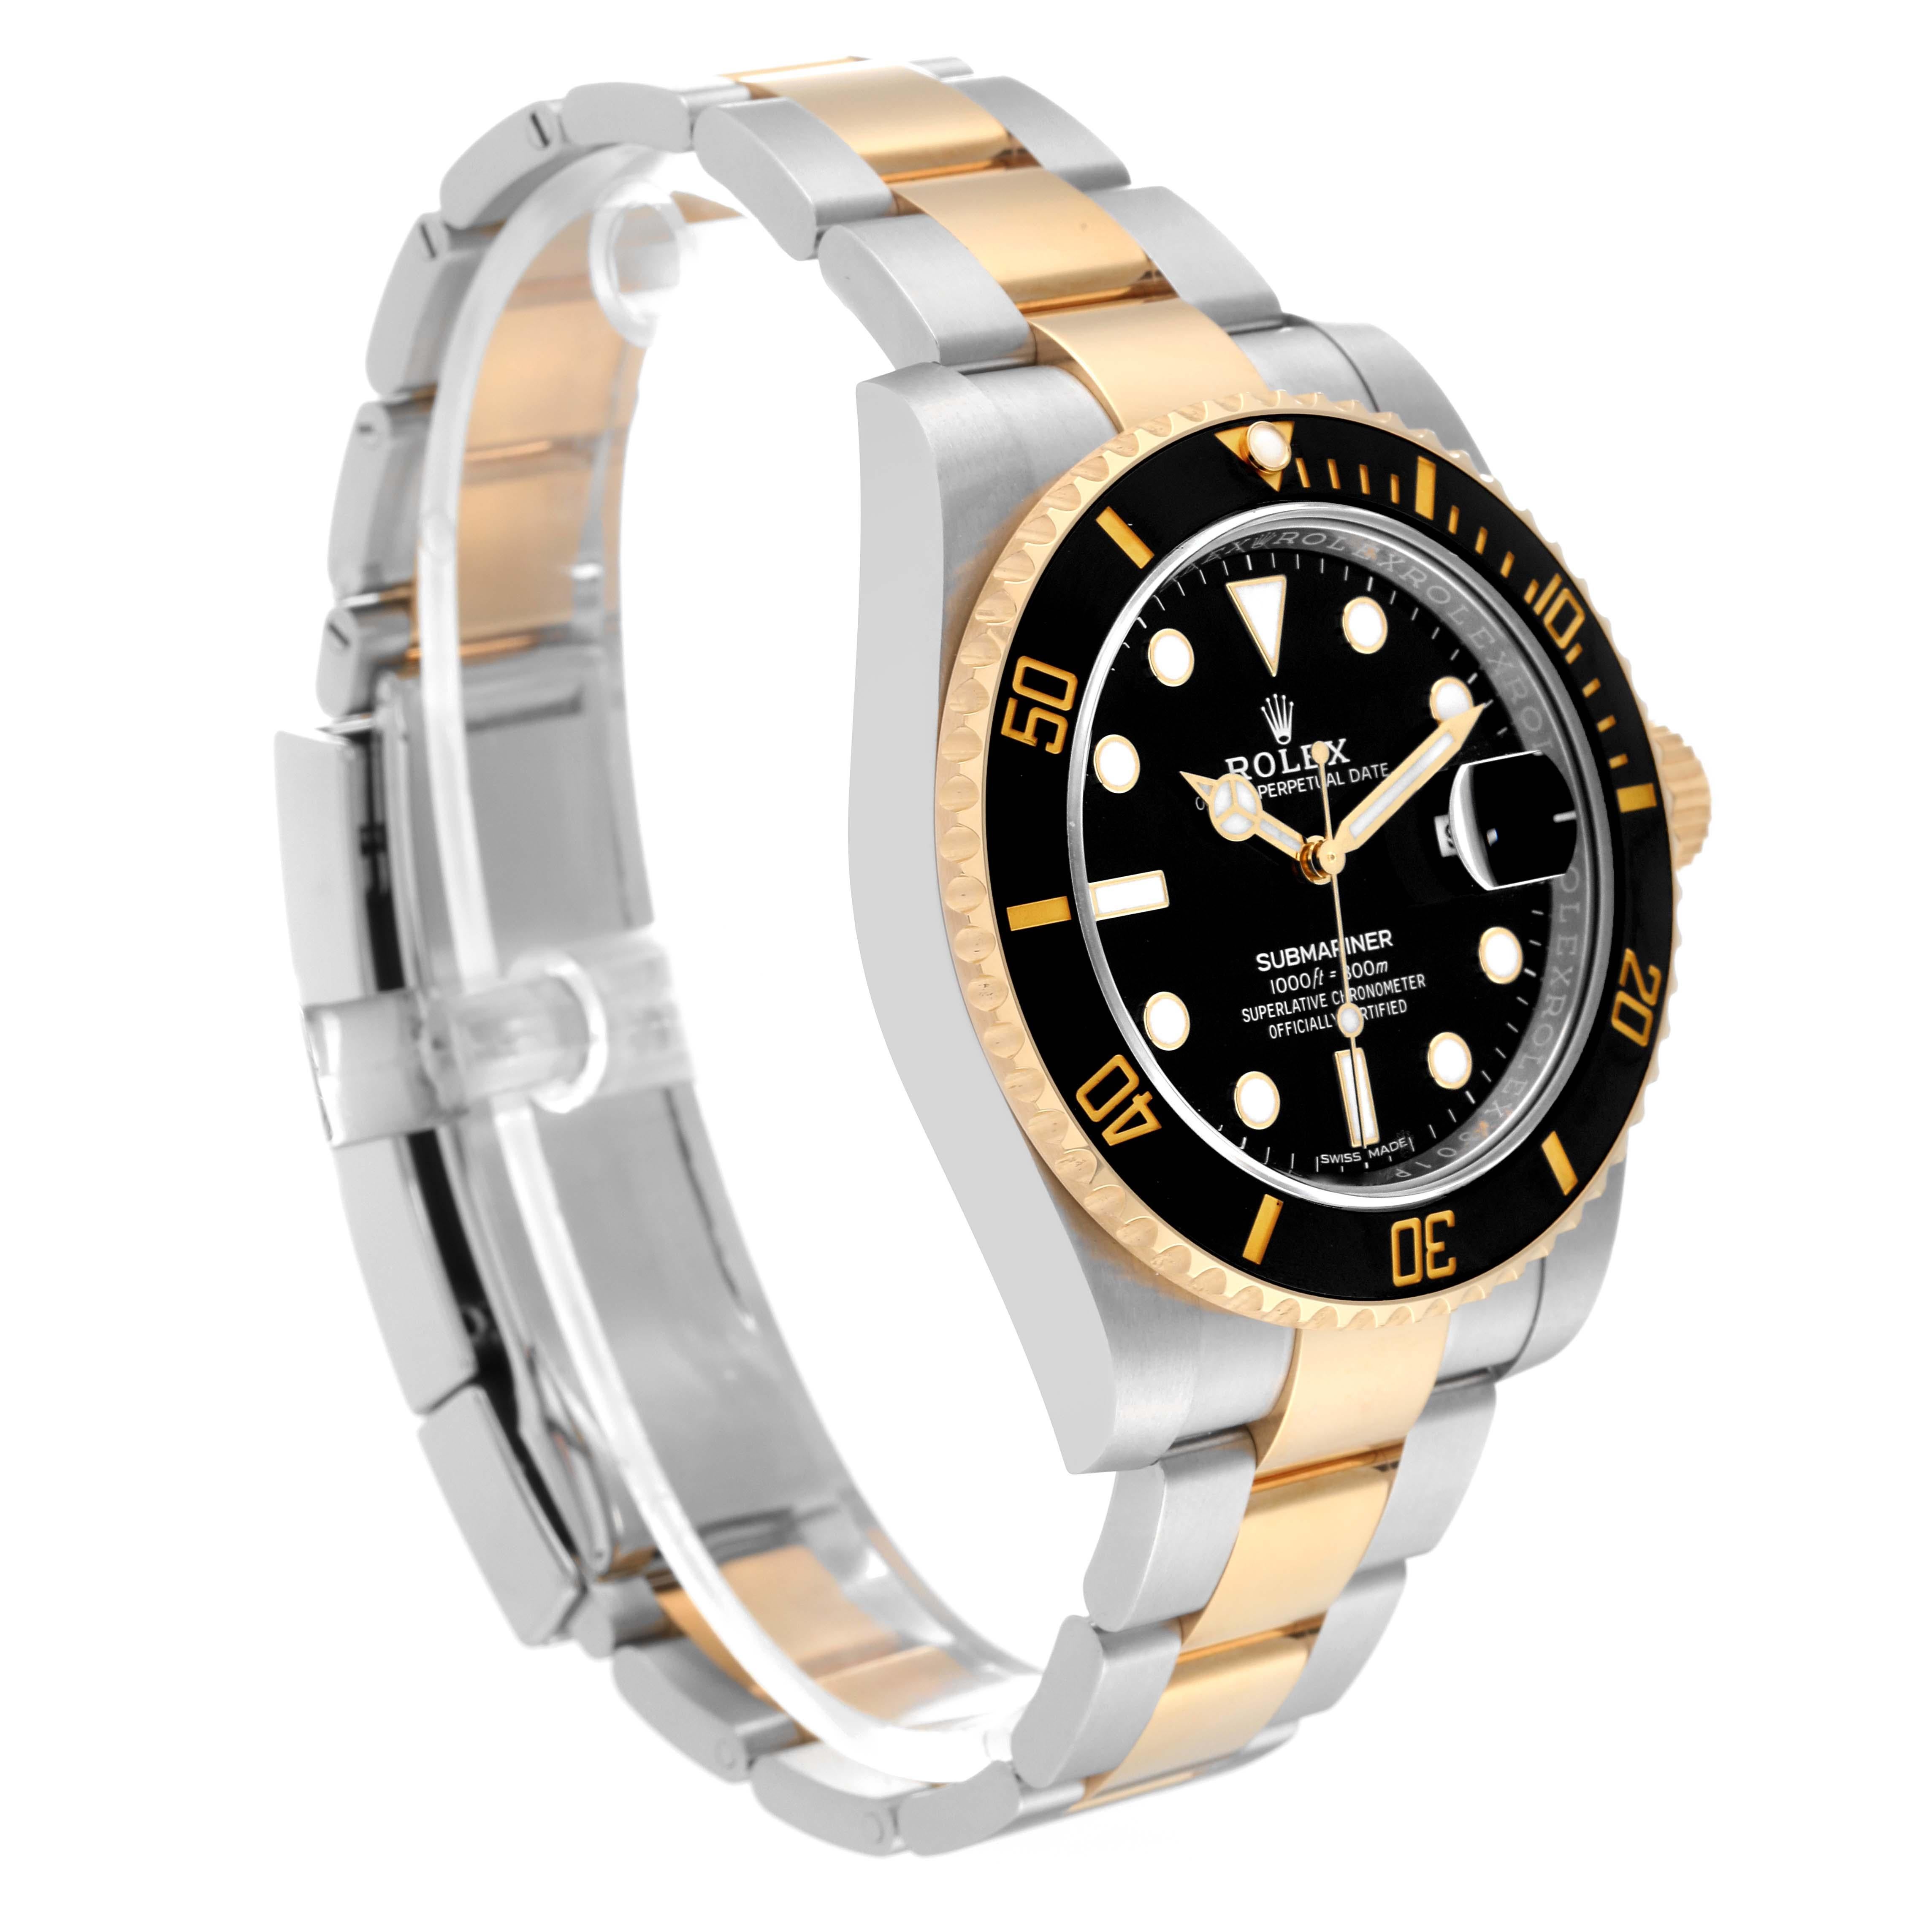 Rolex Submariner Steel Yellow Gold Black Dial Mens Watch 116613 Box Card 6